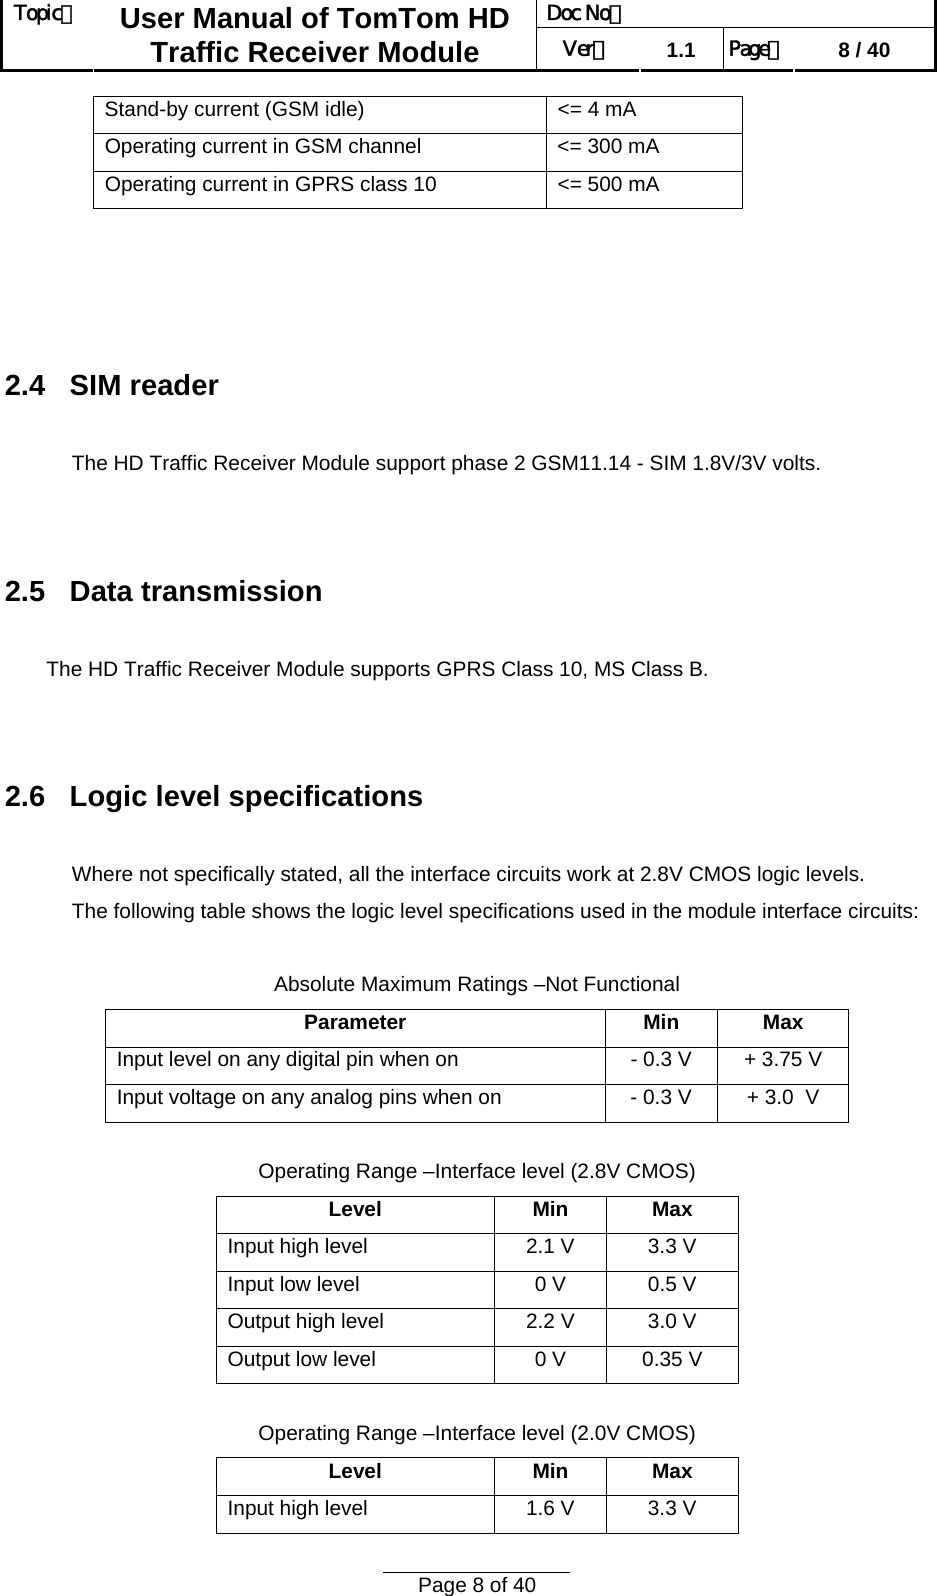 Doc No：  Topic：  User Manual of TomTom HD Traffic Receiver Module  Ver：  1.1  Page：  8 / 40  Page 8 of 40  Stand-by current (GSM idle)  &lt;= 4 mA Operating current in GSM channel  &lt;= 300 mA Operating current in GPRS class 10  &lt;= 500 mA     2.4   SIM reader  The HD Traffic Receiver Module support phase 2 GSM11.14 - SIM 1.8V/3V volts.    2.5   Data transmission  The HD Traffic Receiver Module supports GPRS Class 10, MS Class B.   2.6   Logic level specifications  Where not specifically stated, all the interface circuits work at 2.8V CMOS logic levels. The following table shows the logic level specifications used in the module interface circuits:  Absolute Maximum Ratings –Not Functional Parameter Min Max Input level on any digital pin when on  - 0.3 V  + 3.75 V Input voltage on any analog pins when on  - 0.3 V  + 3.0  V  Operating Range –Interface level (2.8V CMOS) Level Min Max Input high level  2.1 V  3.3 V Input low level  0 V  0.5 V Output high level  2.2 V  3.0 V Output low level  0 V  0.35 V  Operating Range –Interface level (2.0V CMOS) Level Min Max Input high level  1.6 V  3.3 V 